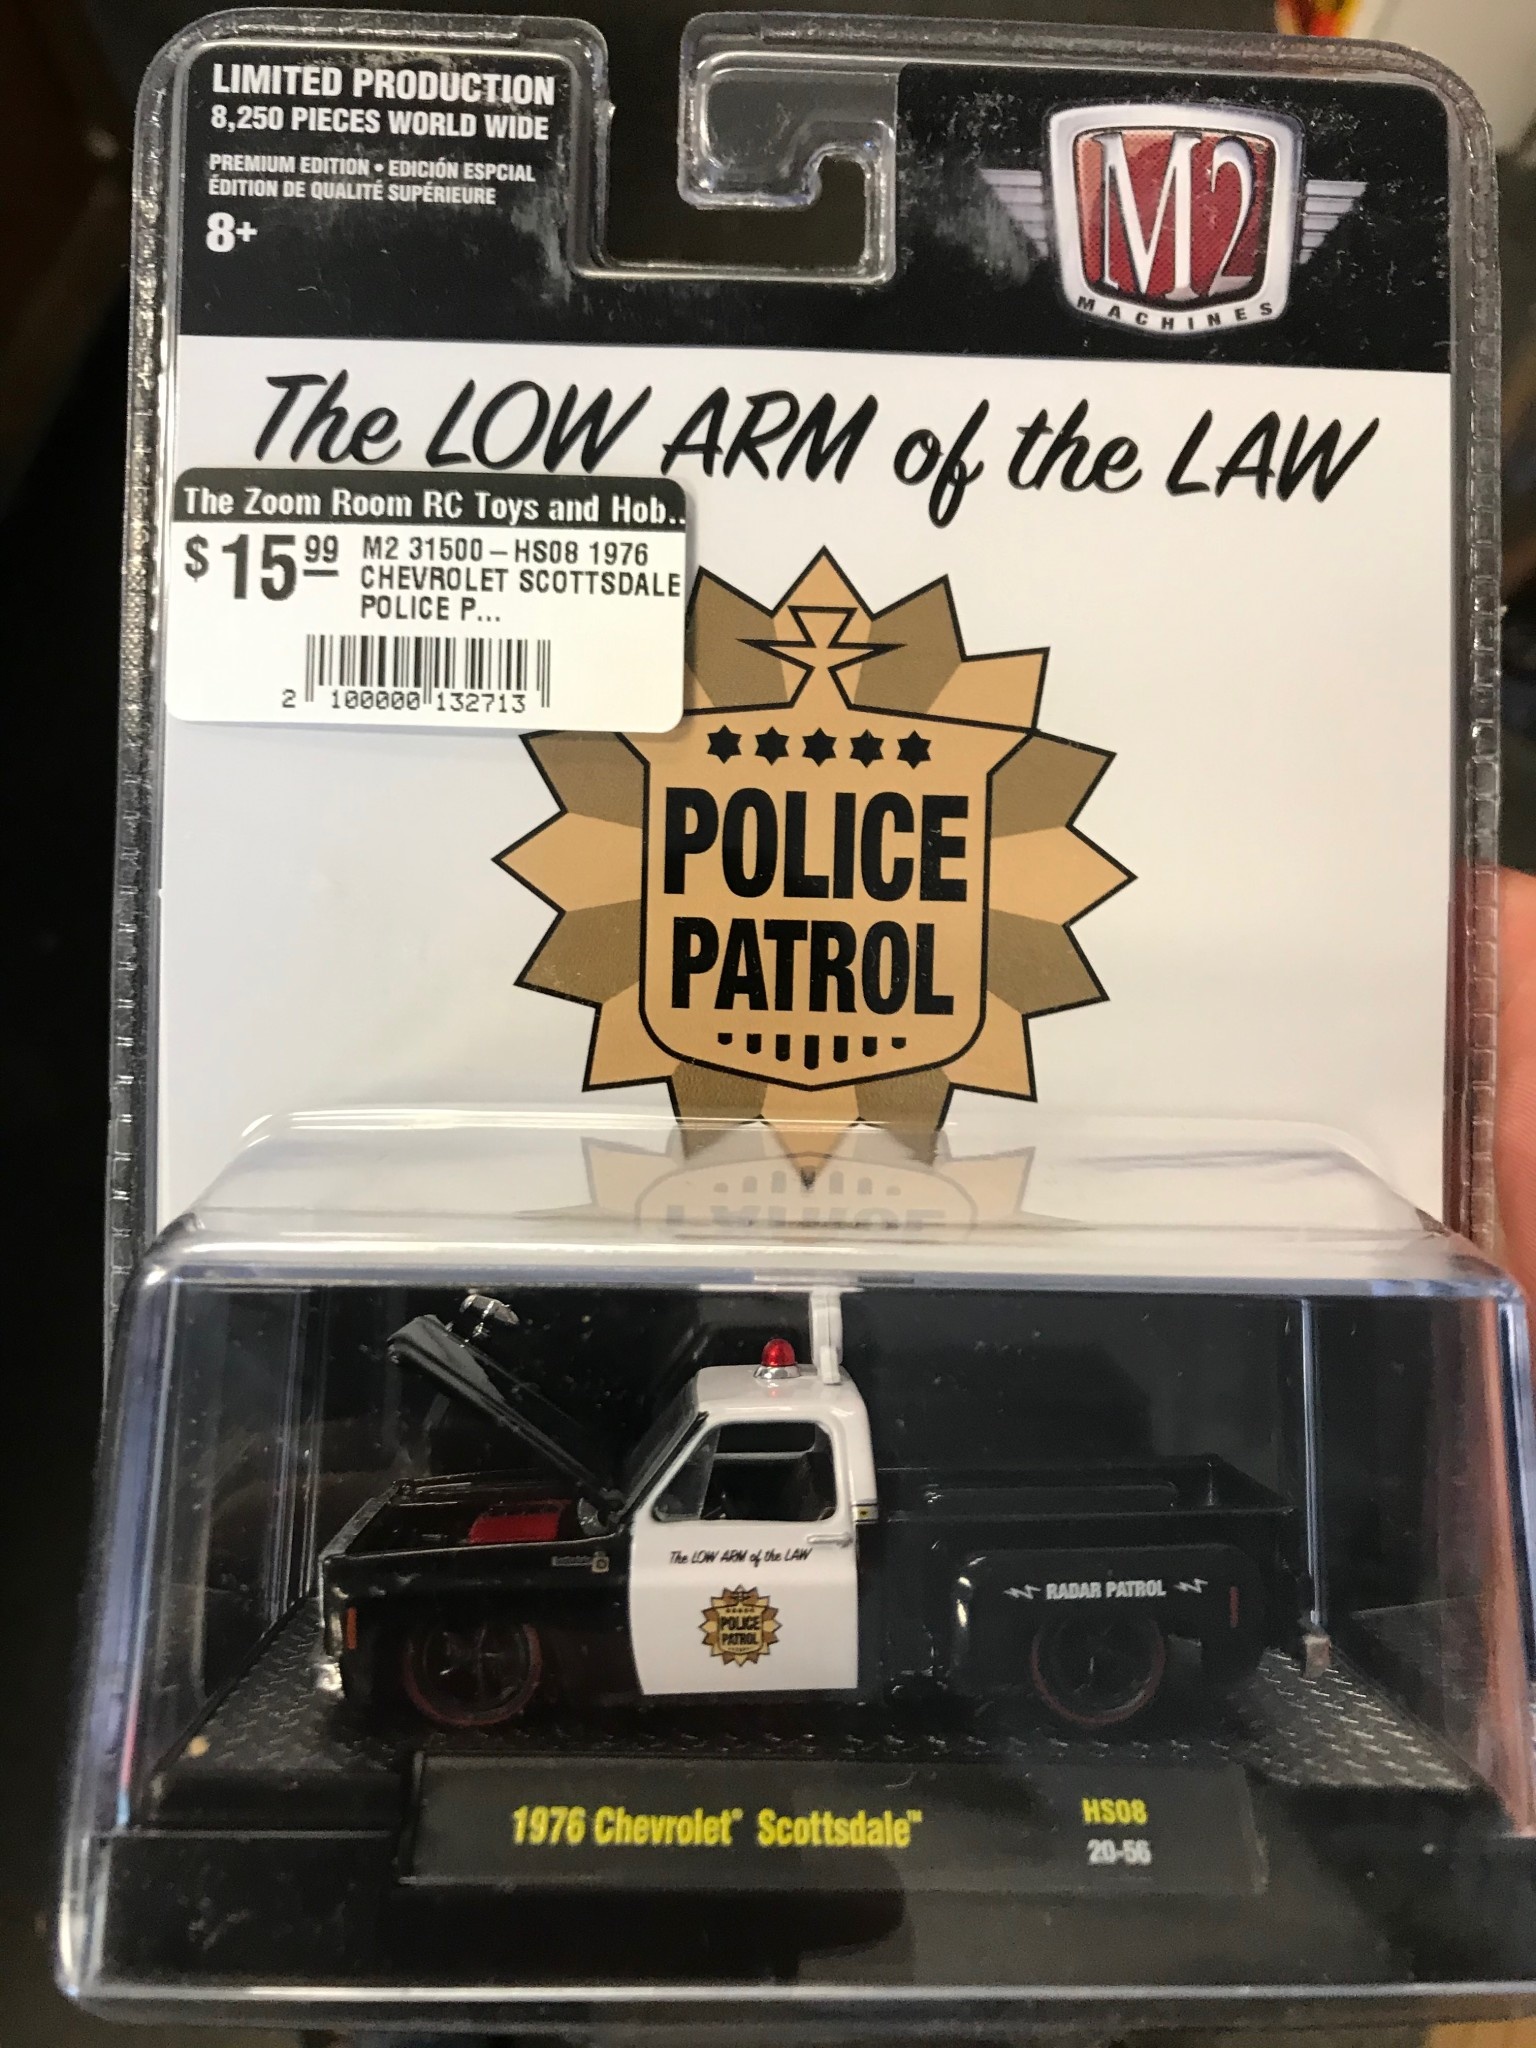 M2 Machines Auto Trucks Low Arm of the Law 76 Chevy Scottsdale